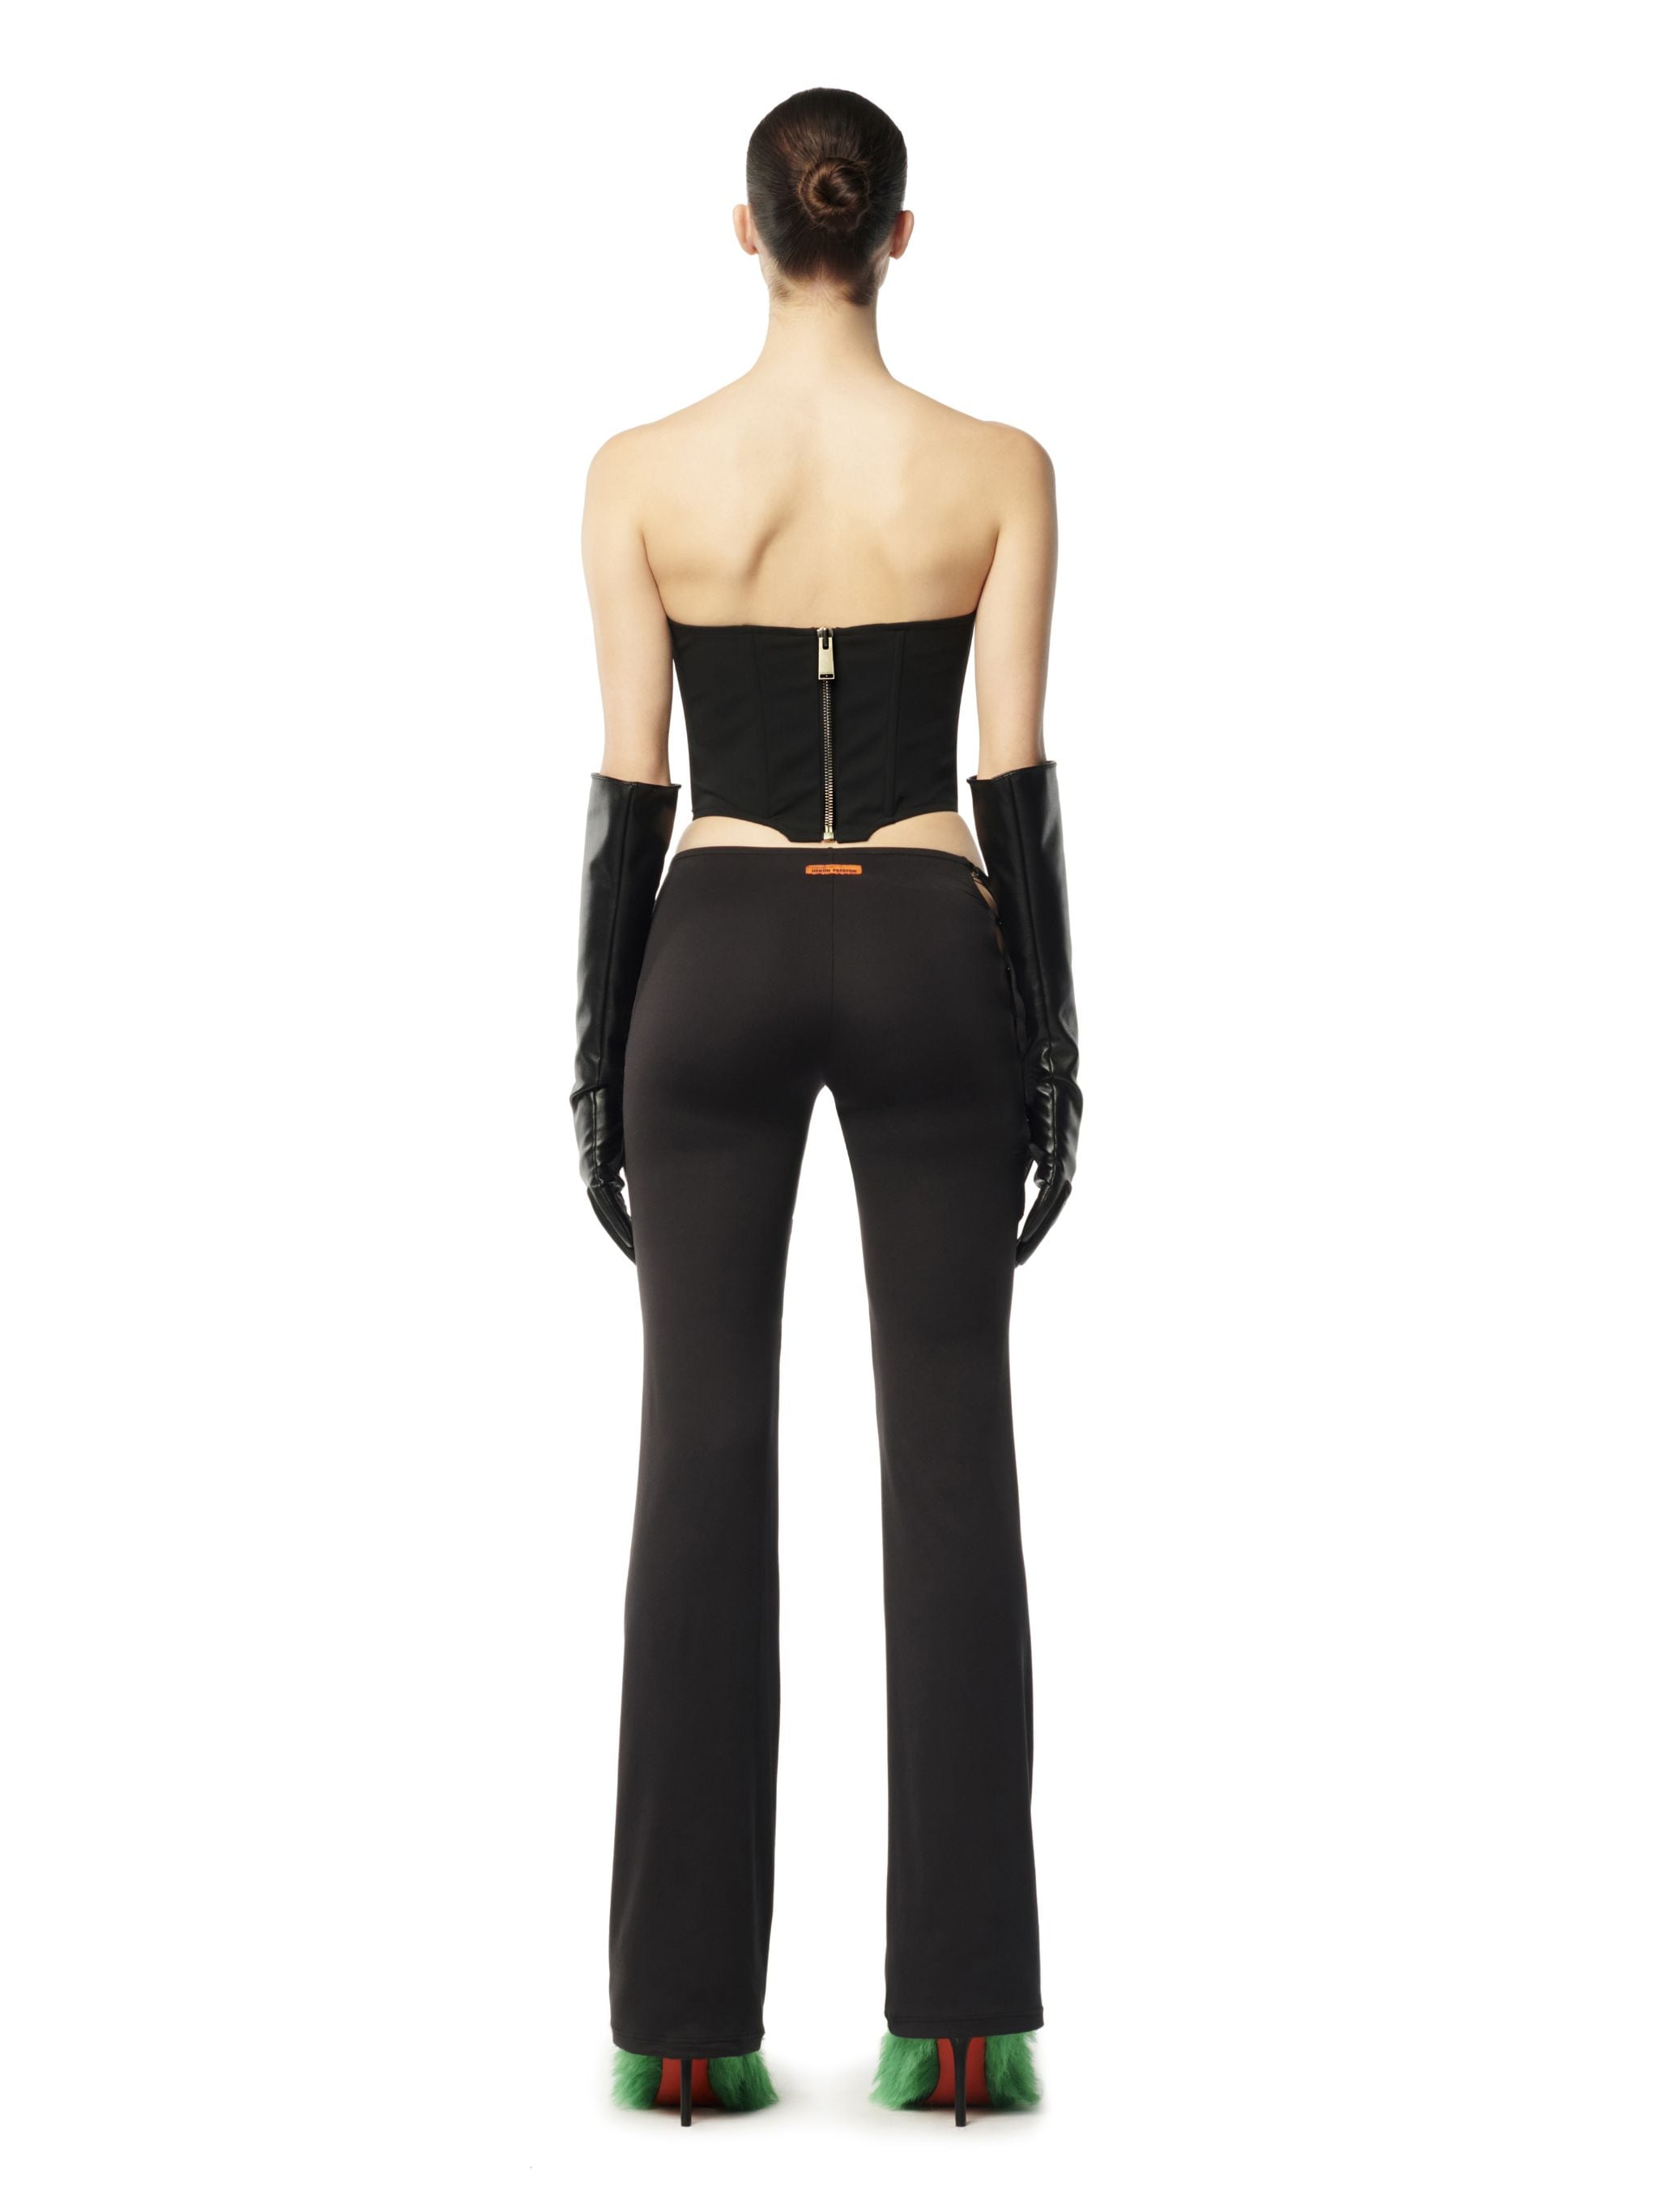 Lace-Up Stretch Flared Pants